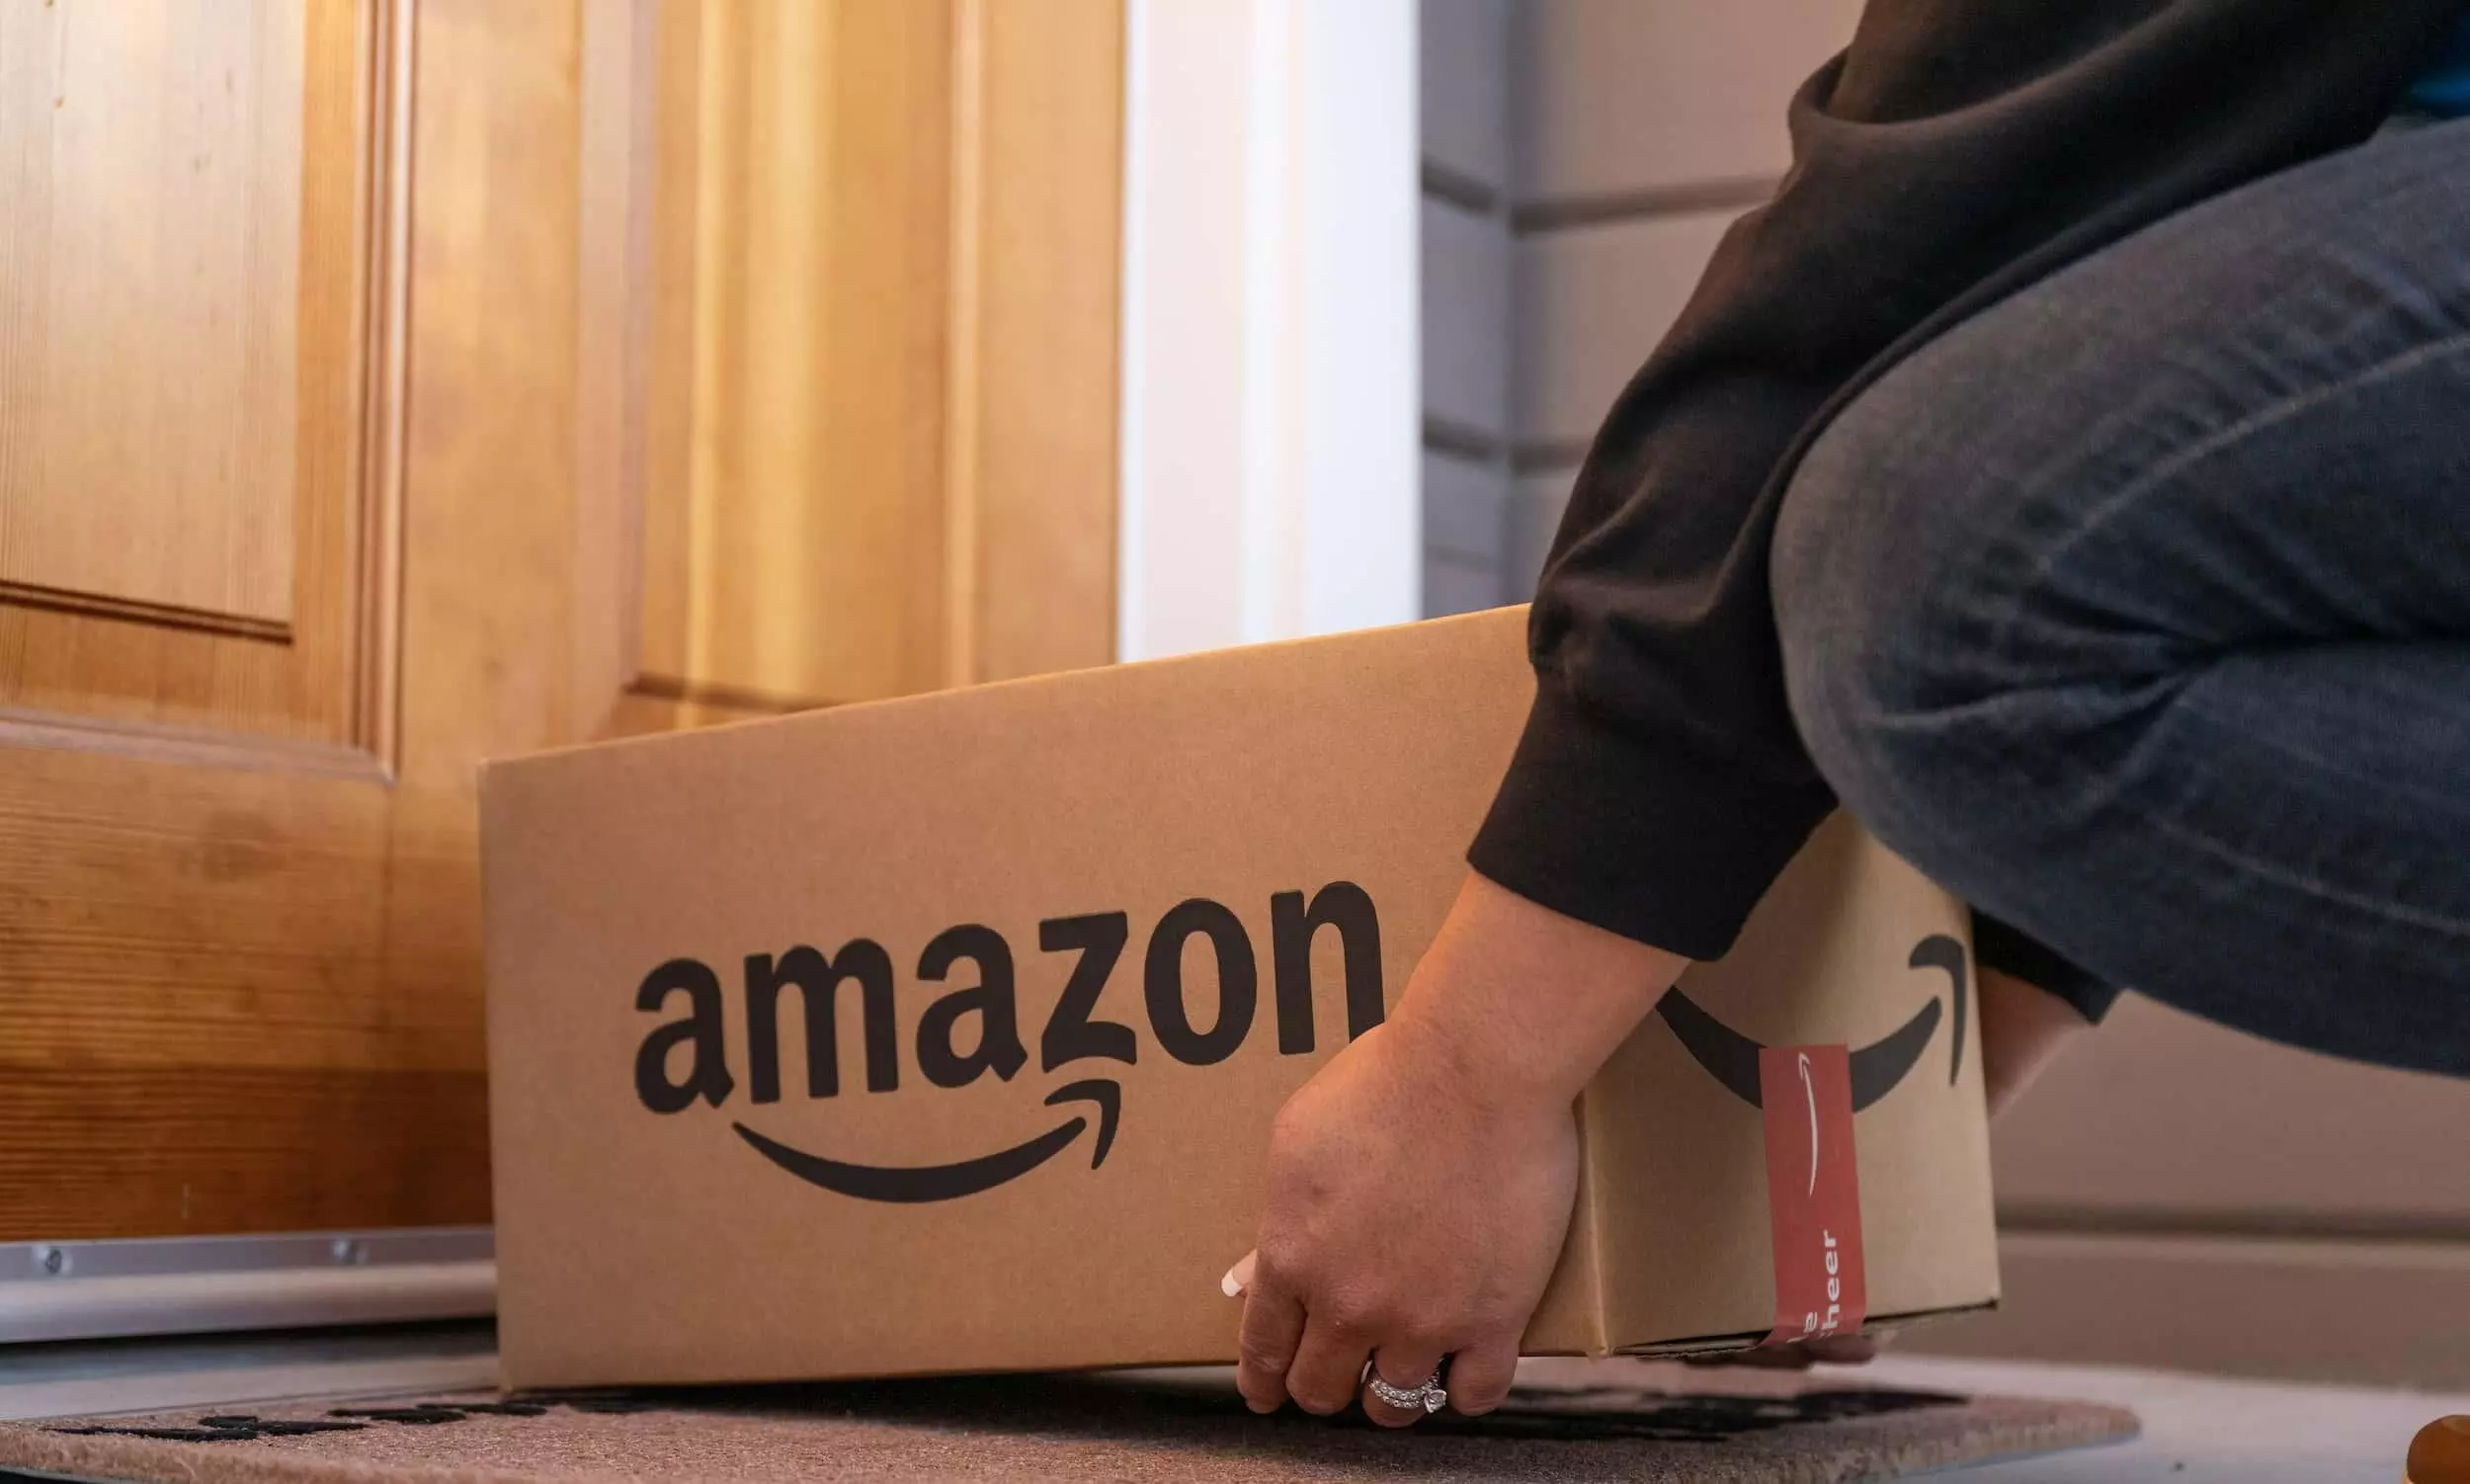 Supply Chain by Amazon offers end-to-end management